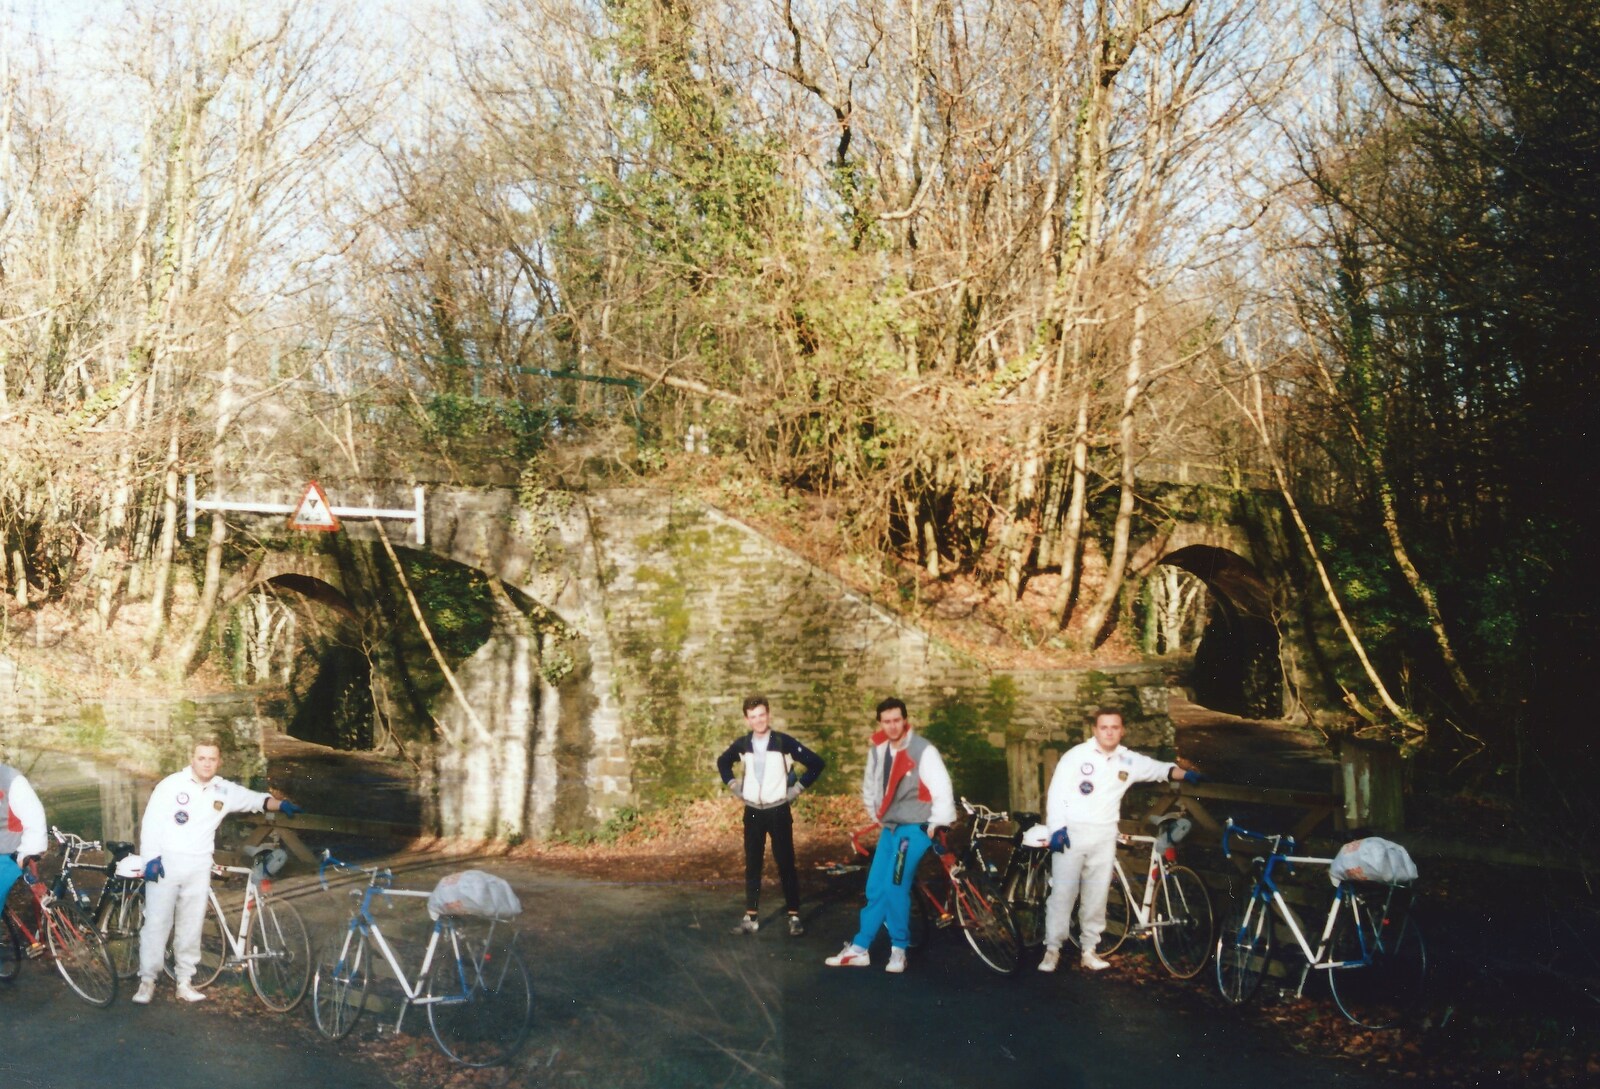 A camera error makes for an interesting photo from Uni: A Ride on the Plym Valley Cycle Path, Plymstock, Devon - 26th February 1989